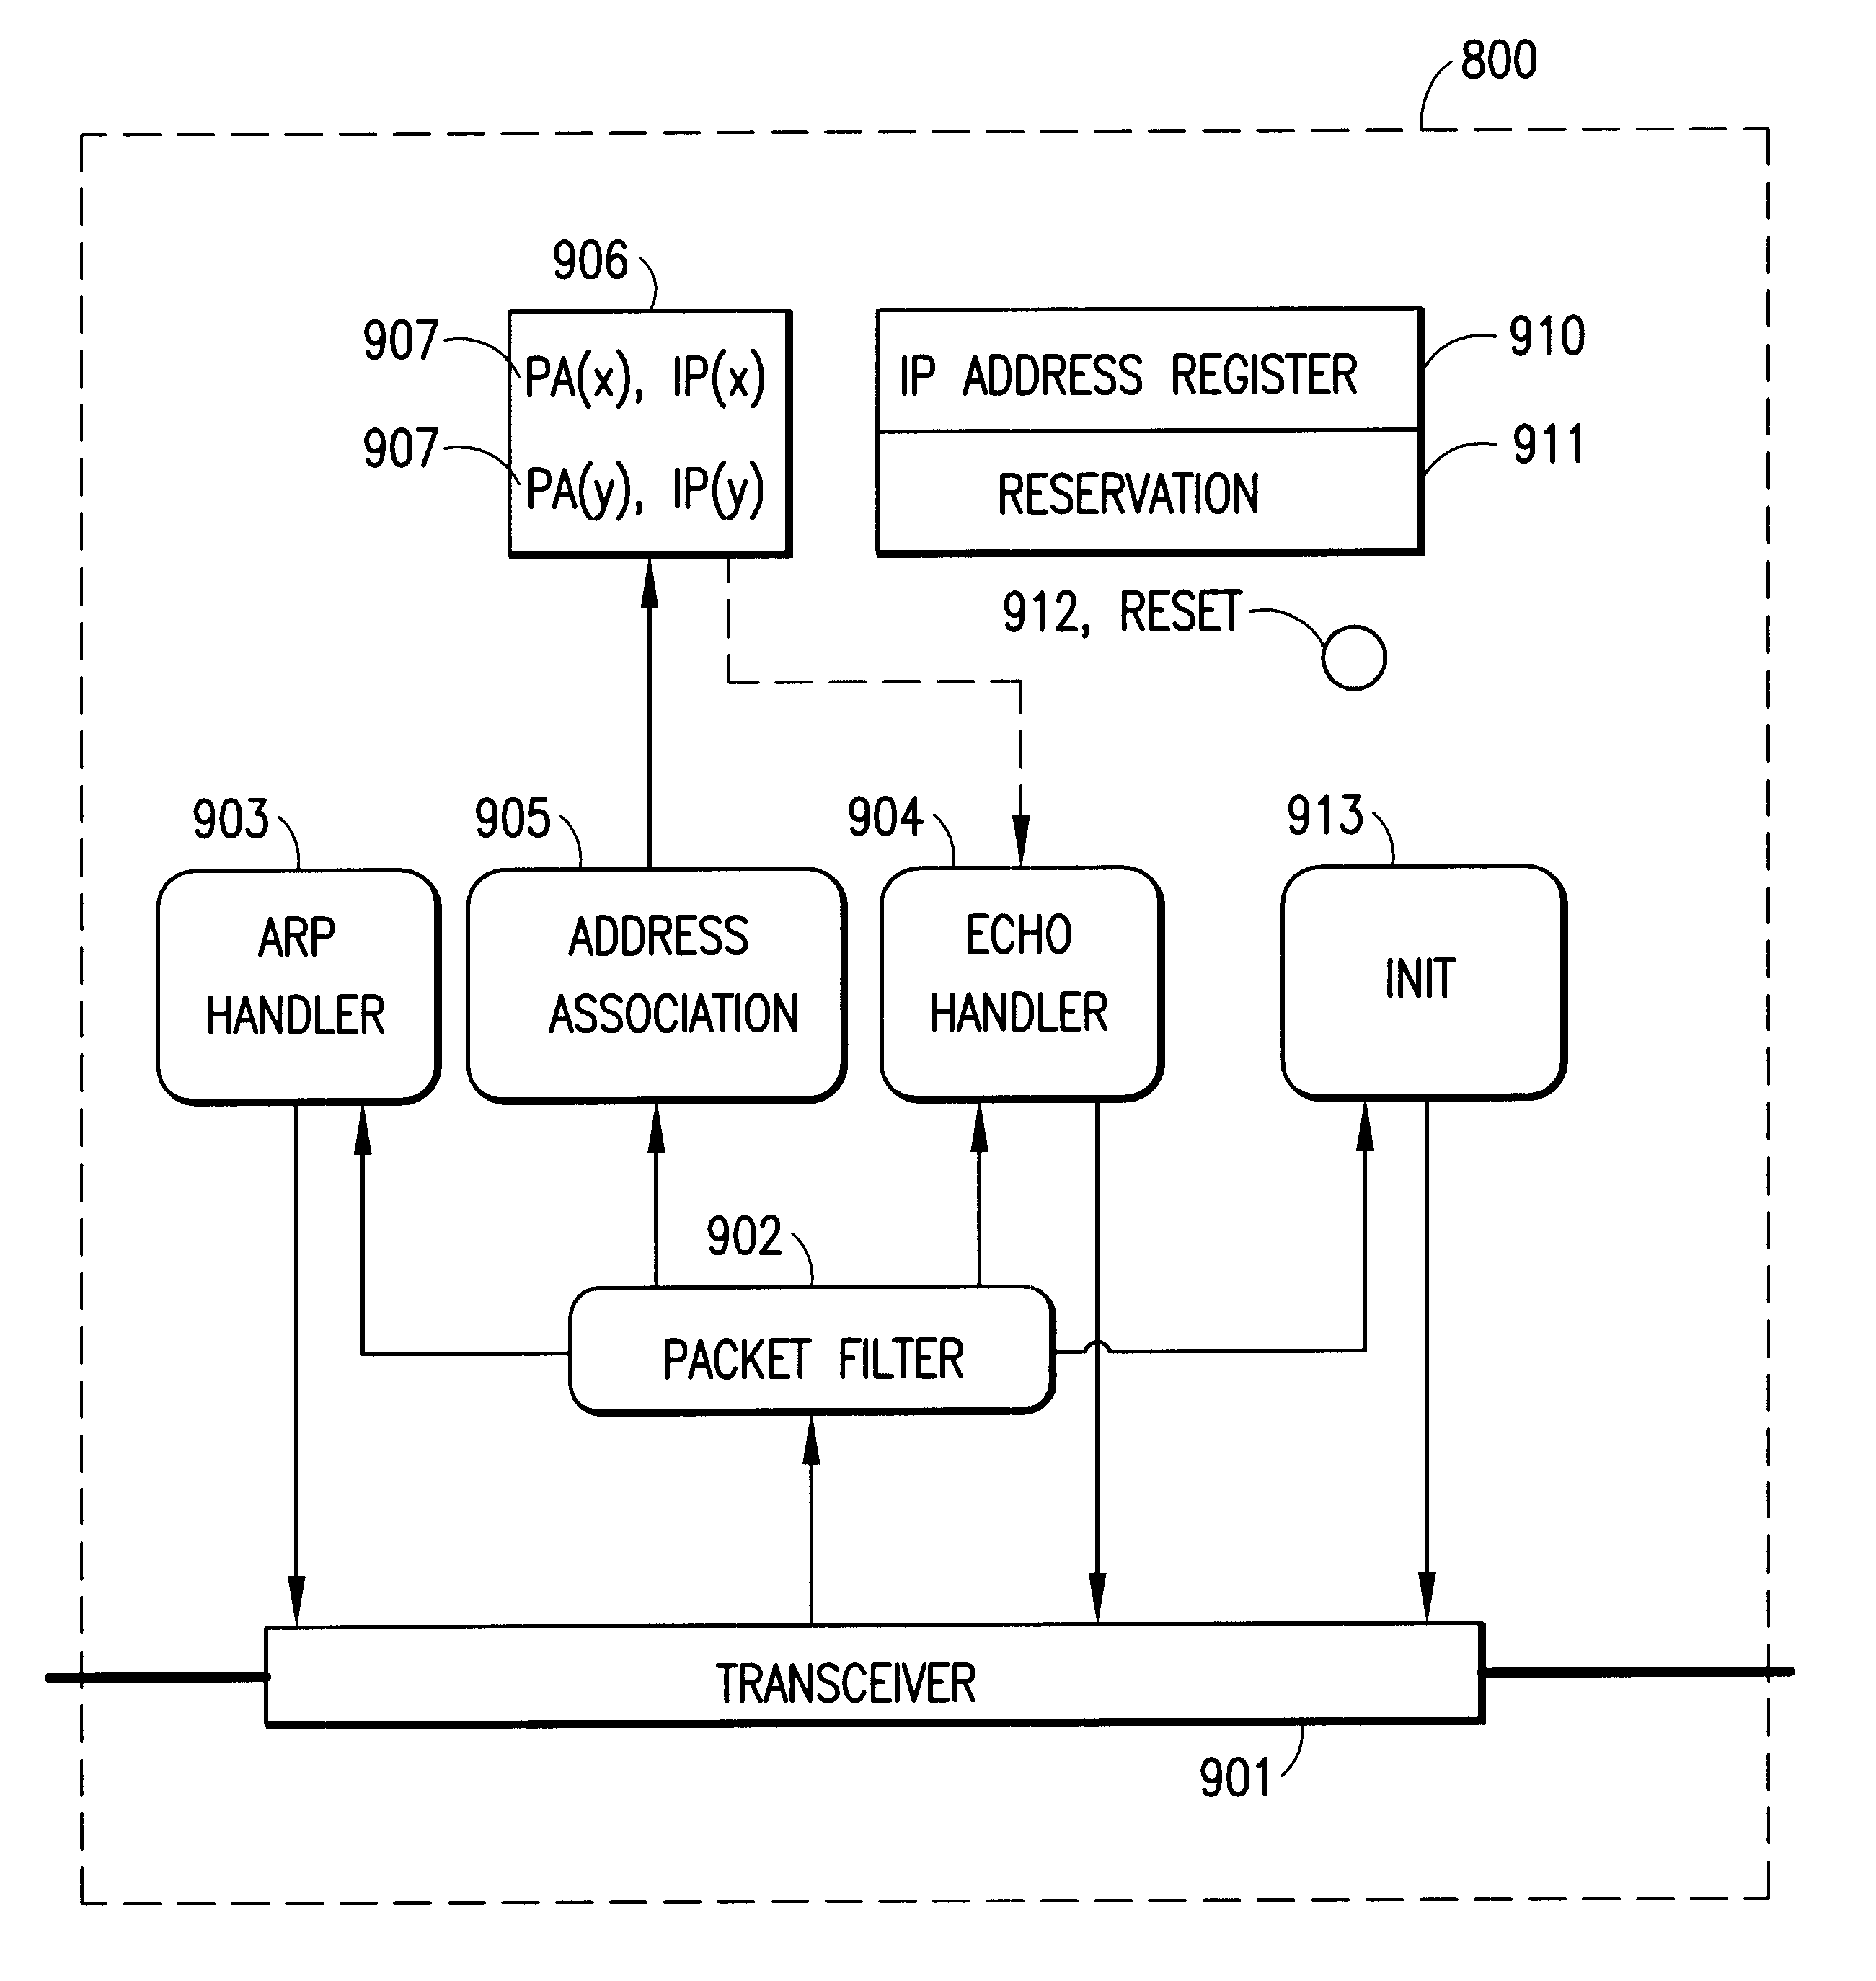 Method and apparatus for asset tracking of network attached devices